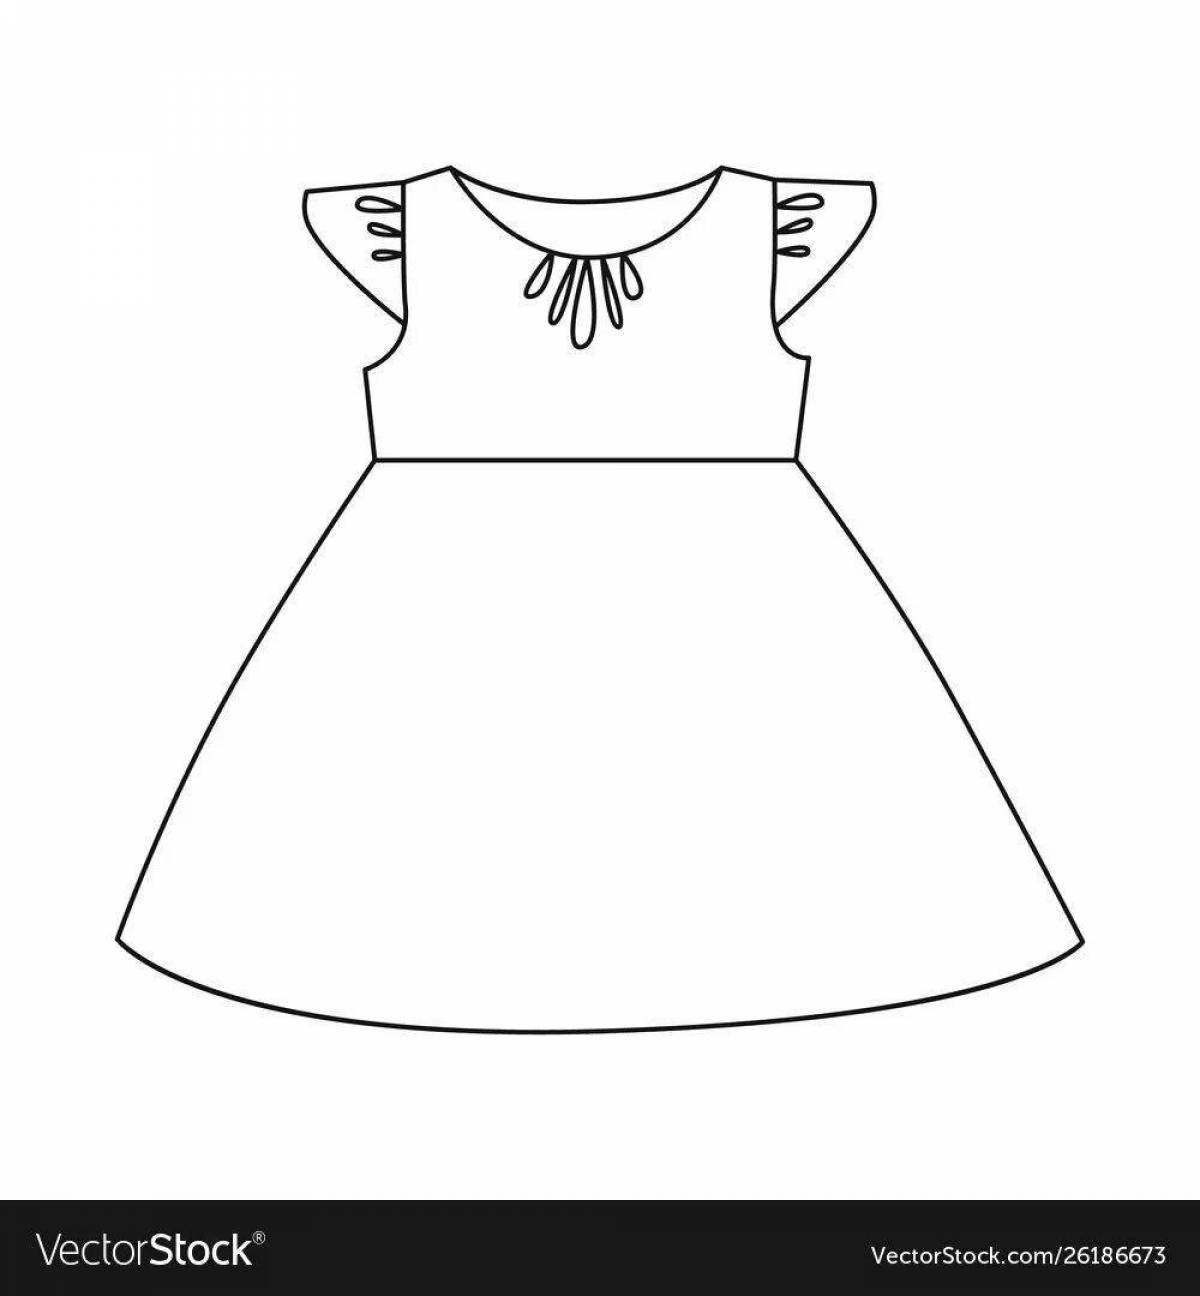 Adorable coloring dress for 4-5 year olds